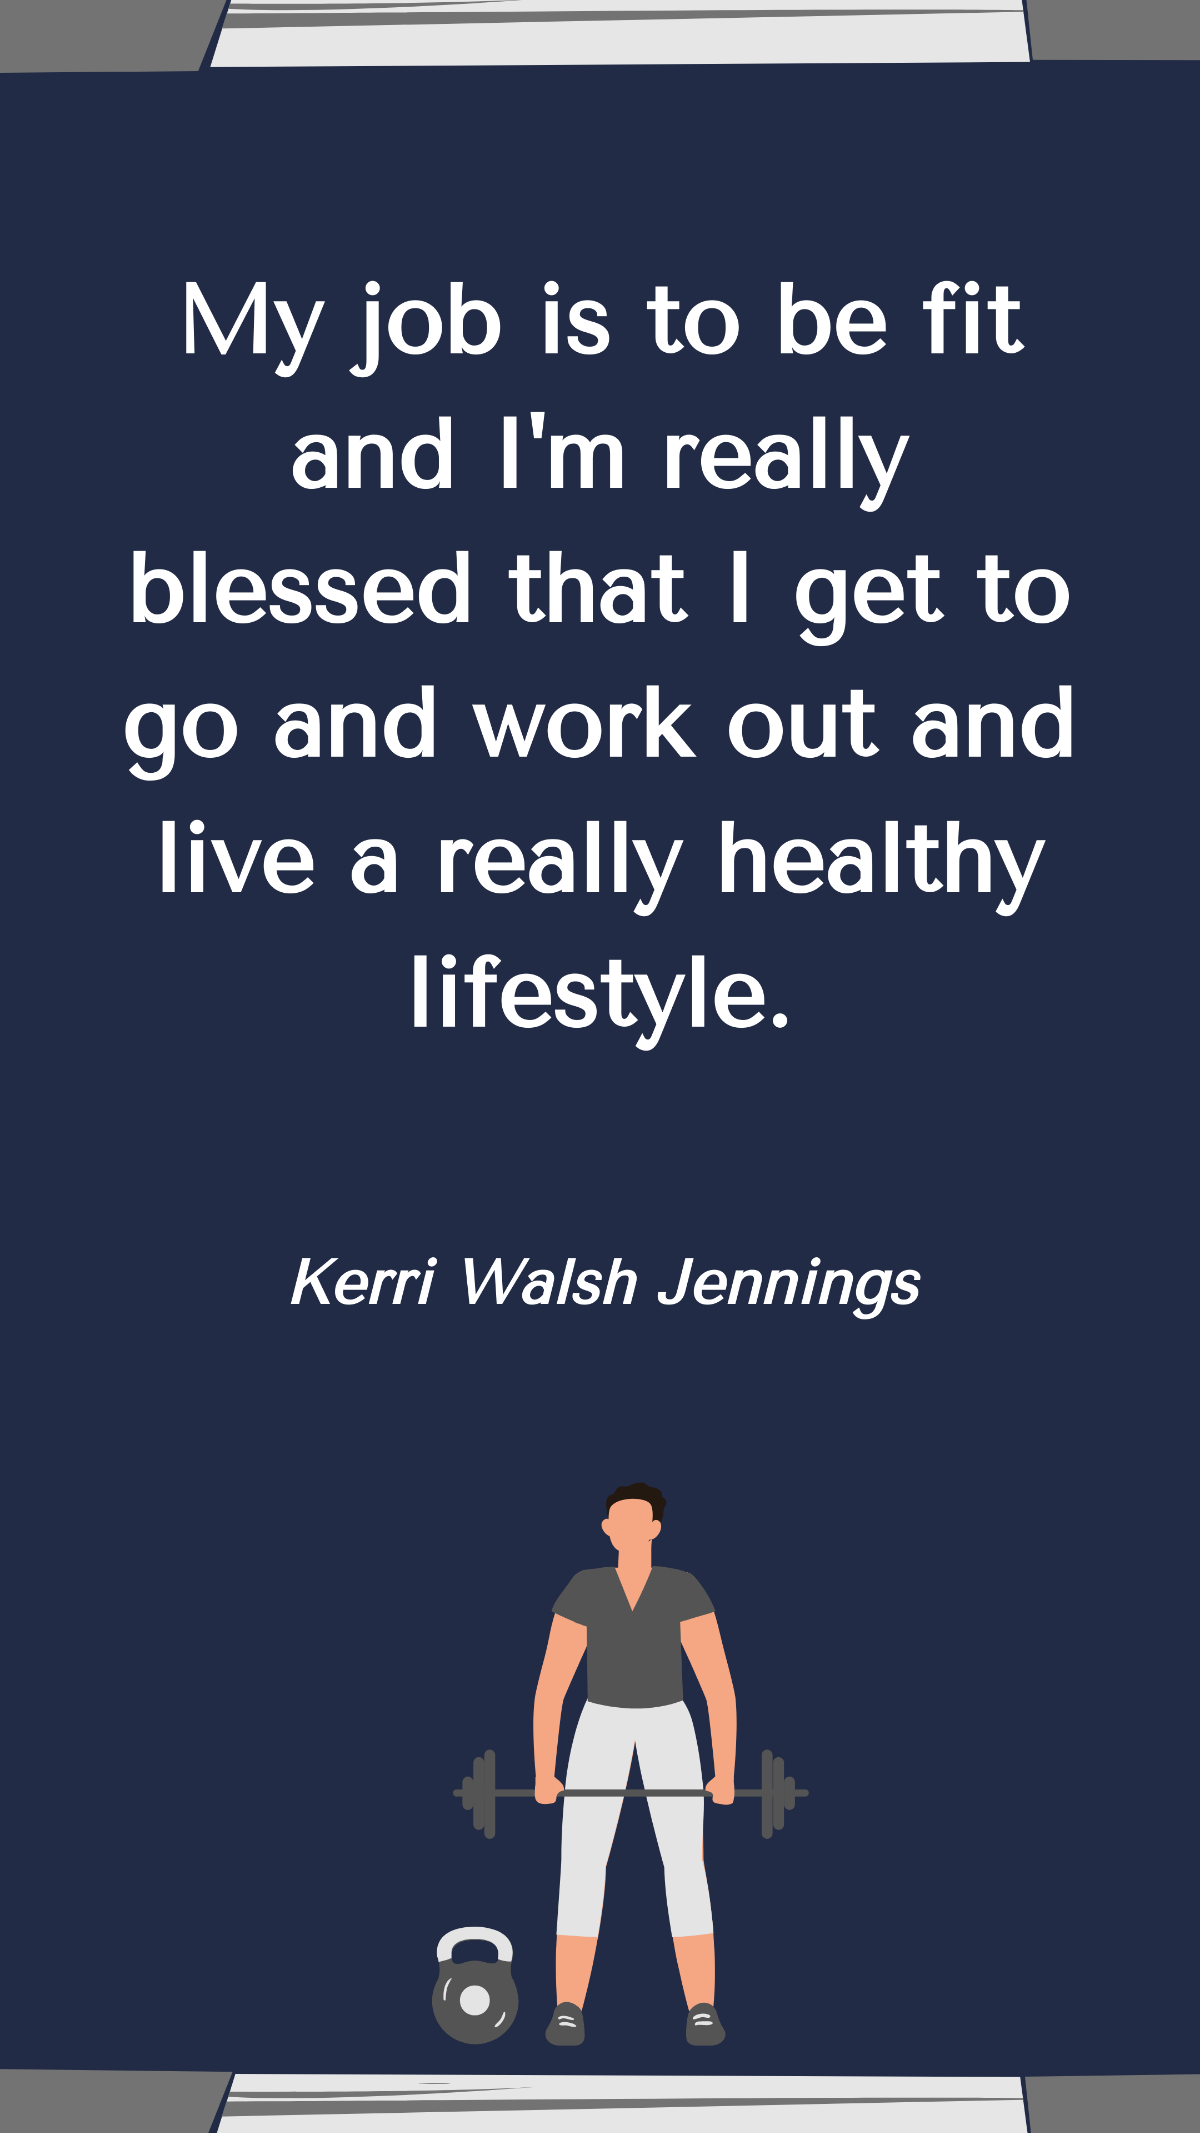 Kerri Walsh Jennings - My job is to be fit and I'm really blessed that I get to go and work out and live a really healthy lifestyle. Template